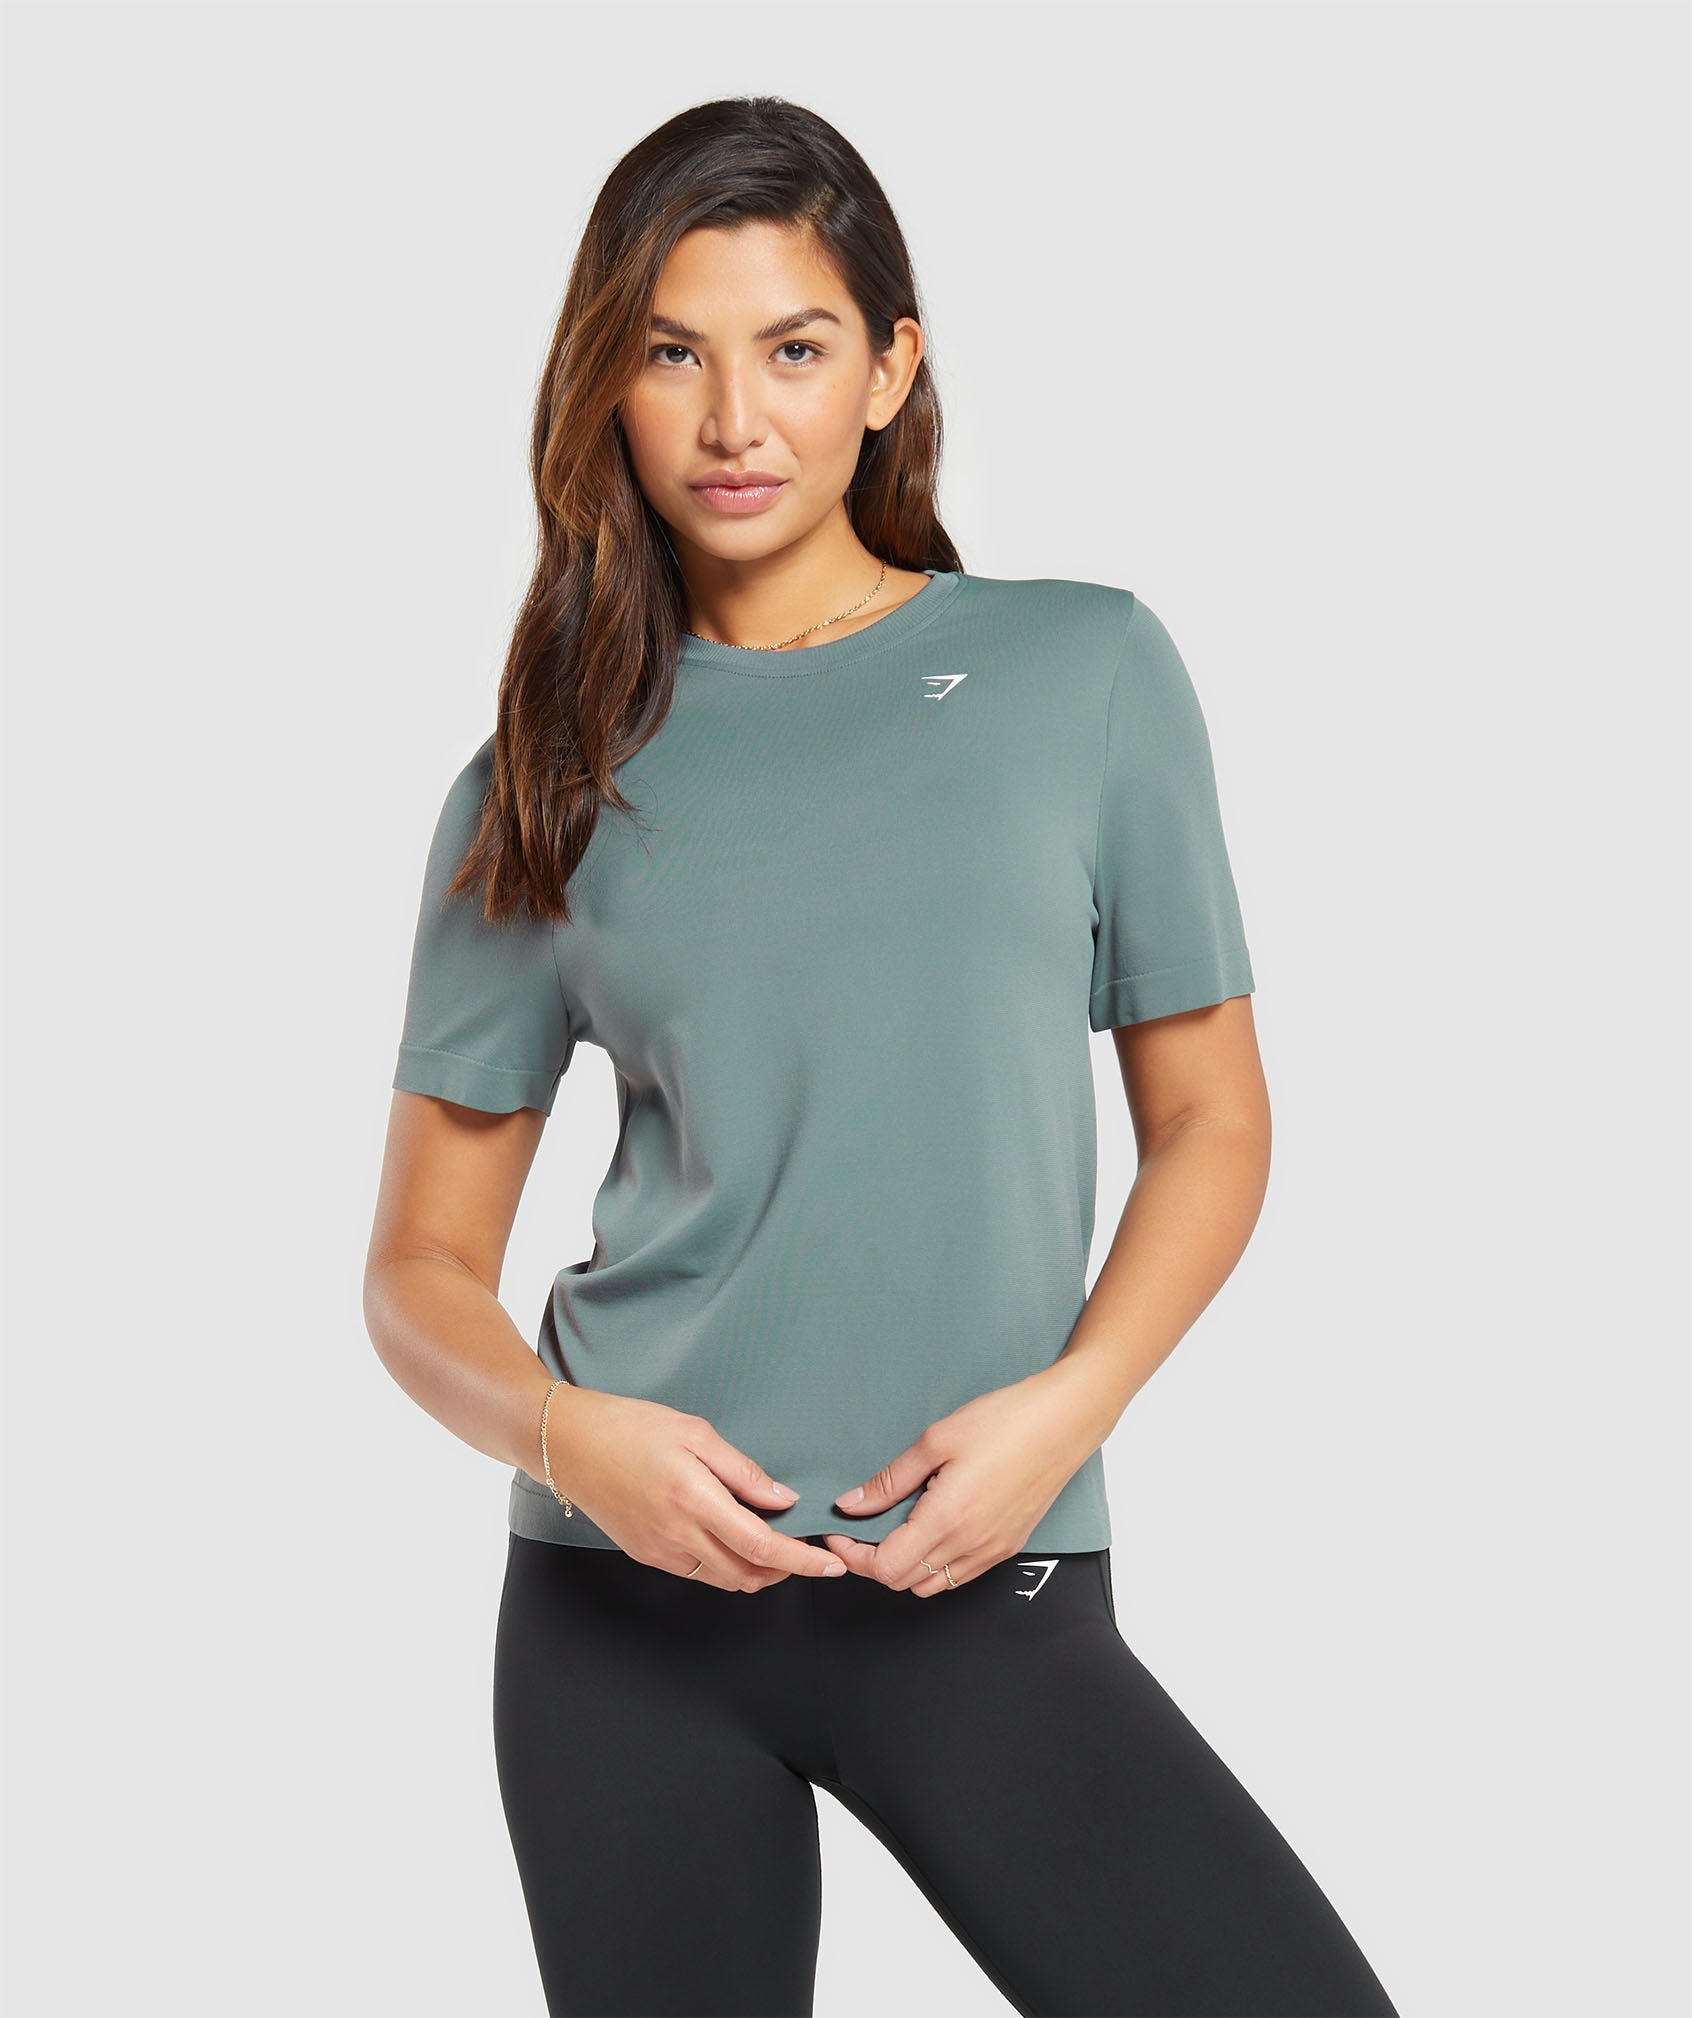 Everyday Seamless T-Shirt in Cargo Teal - view 1